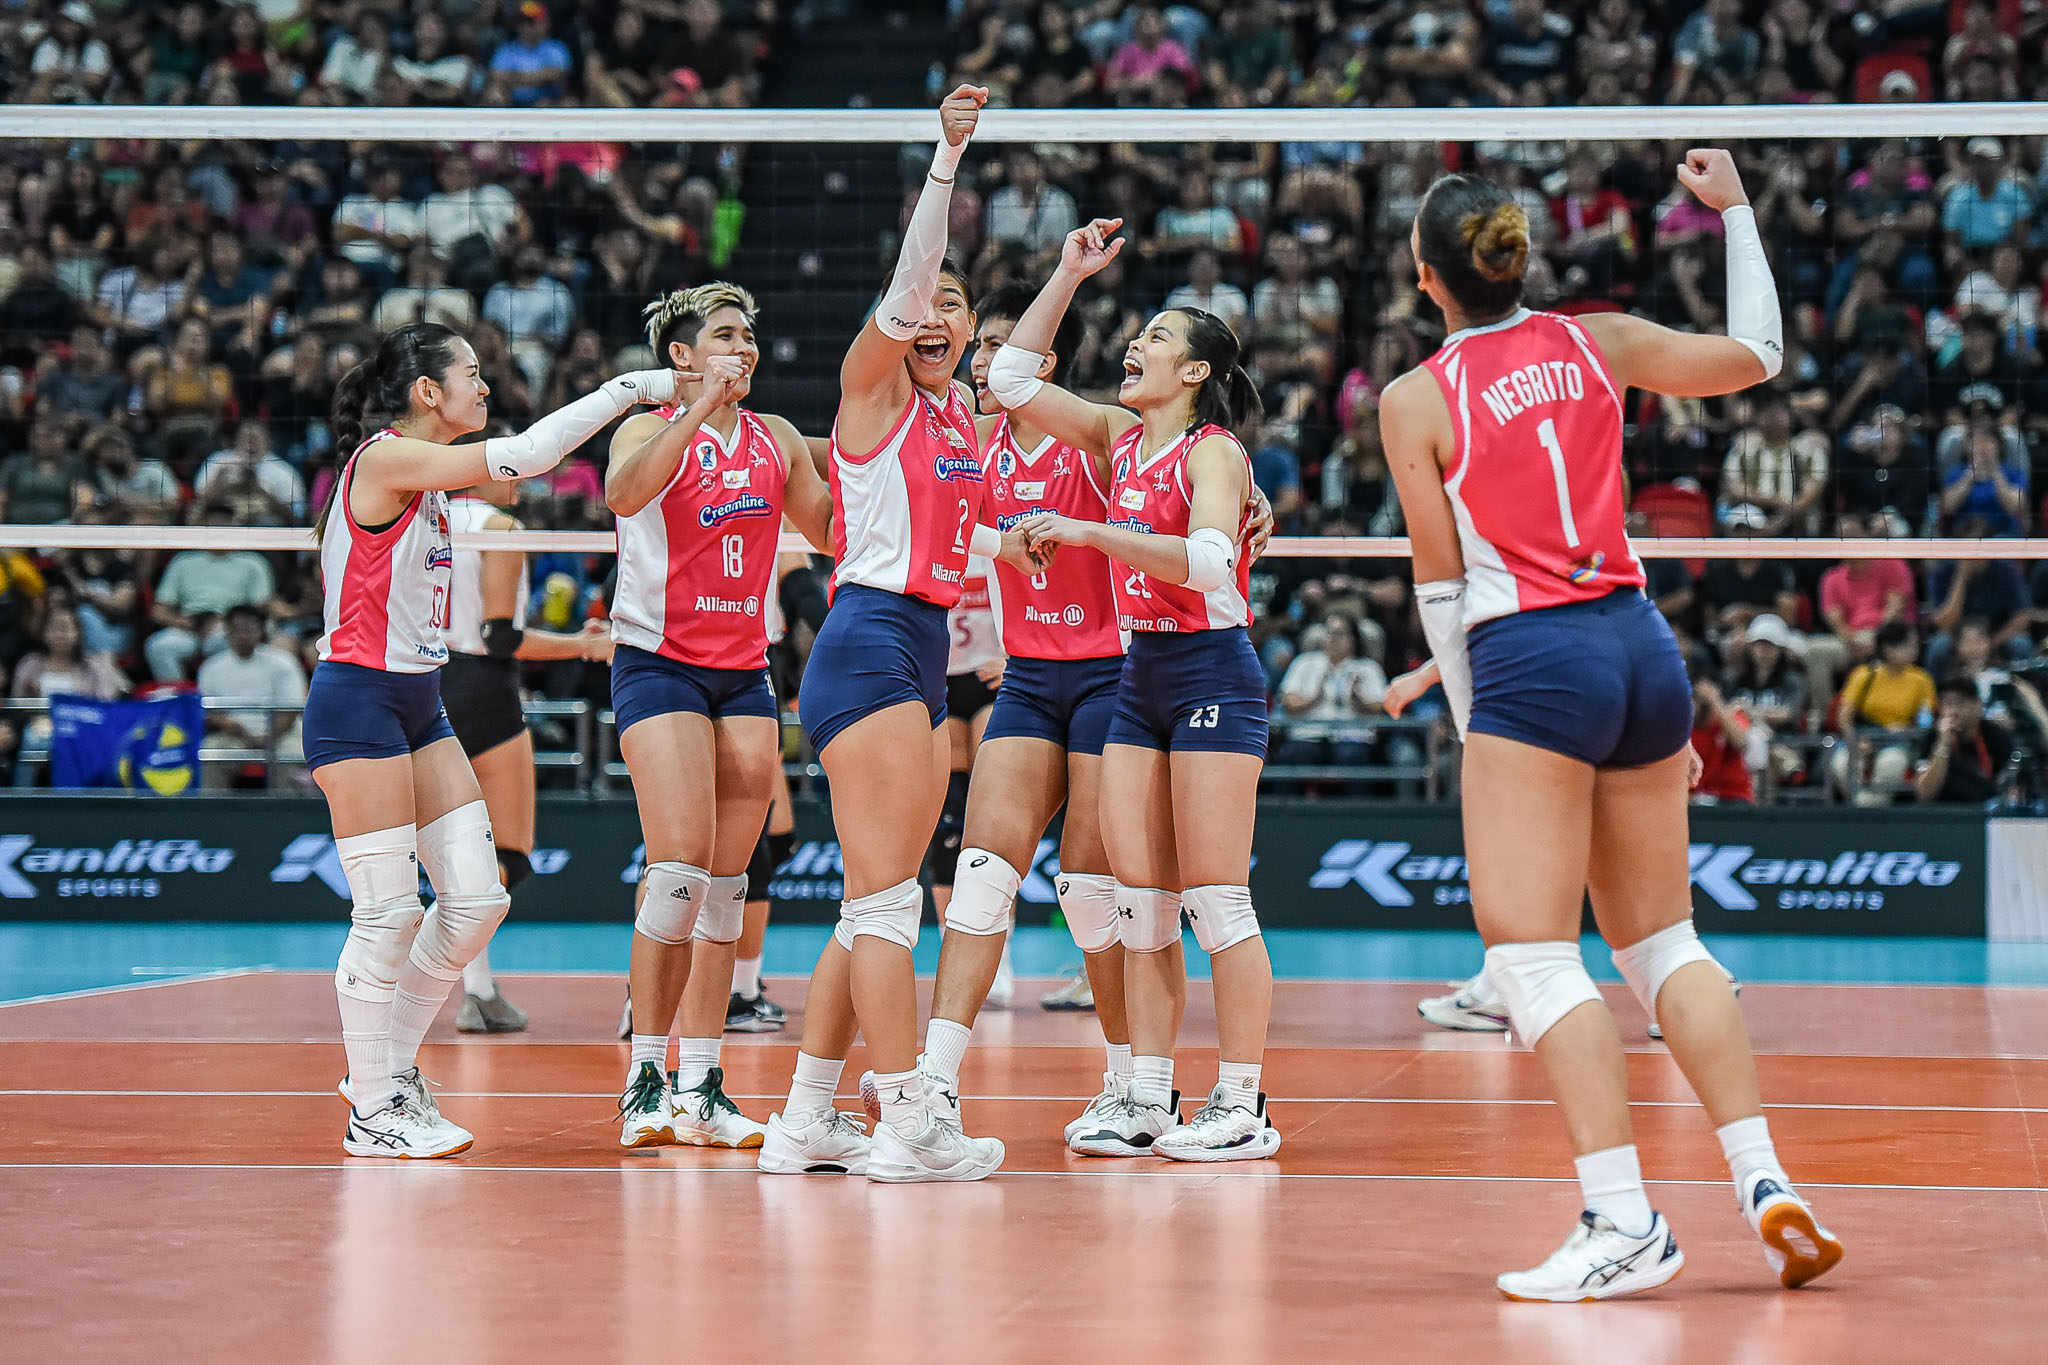 creamline is probably the most scouted team in the pvl